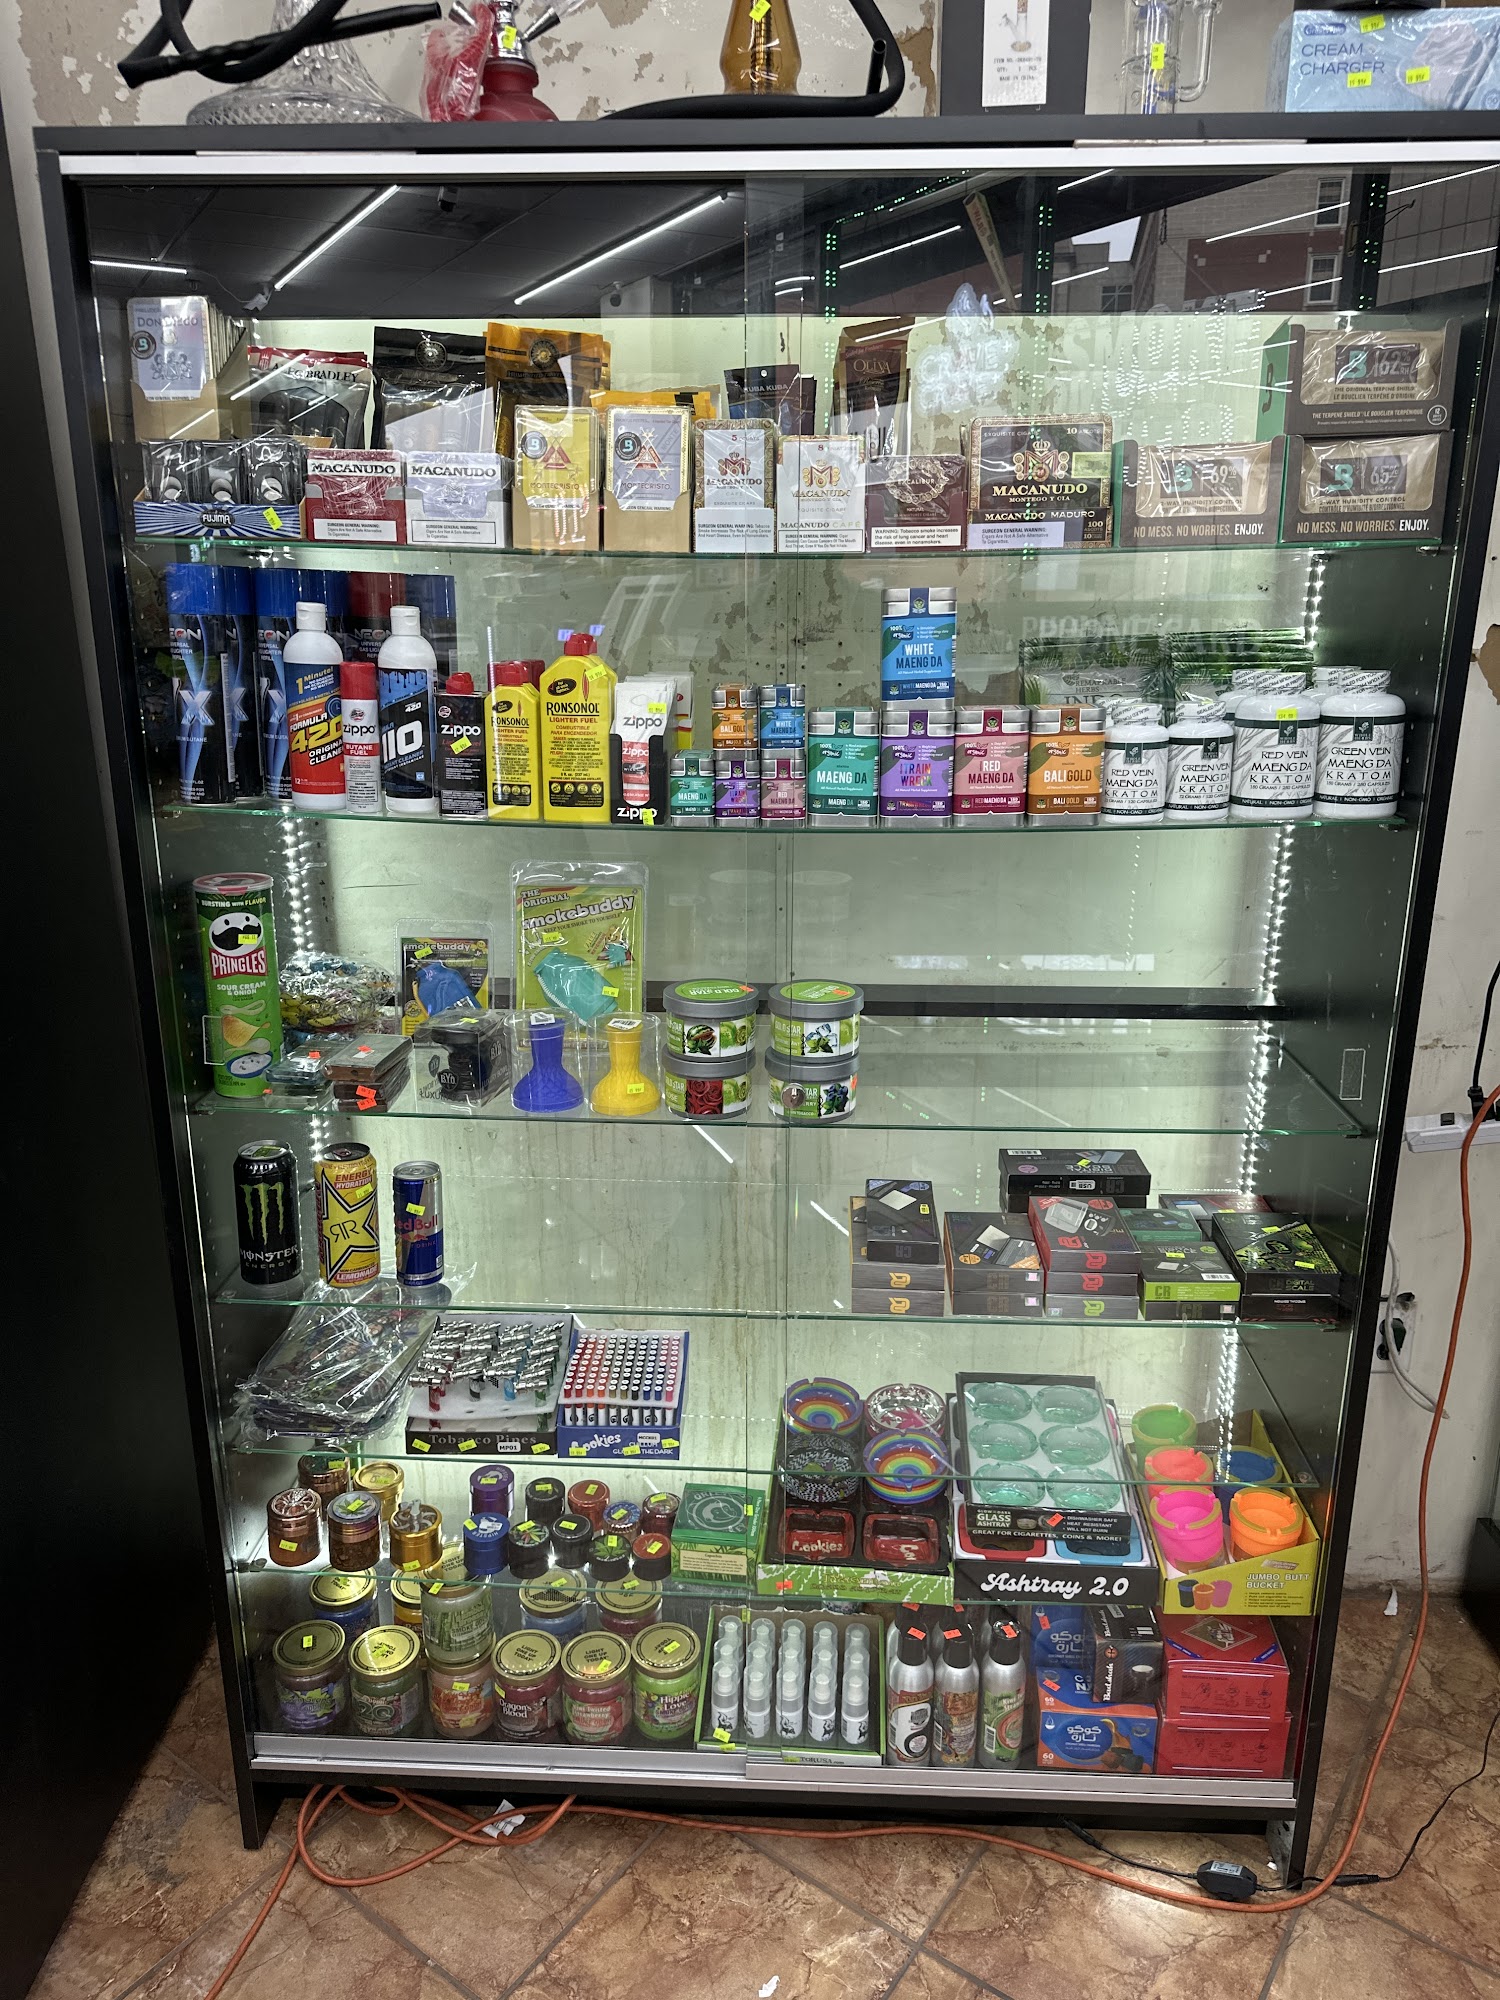 Tremont smoke shop and Variety